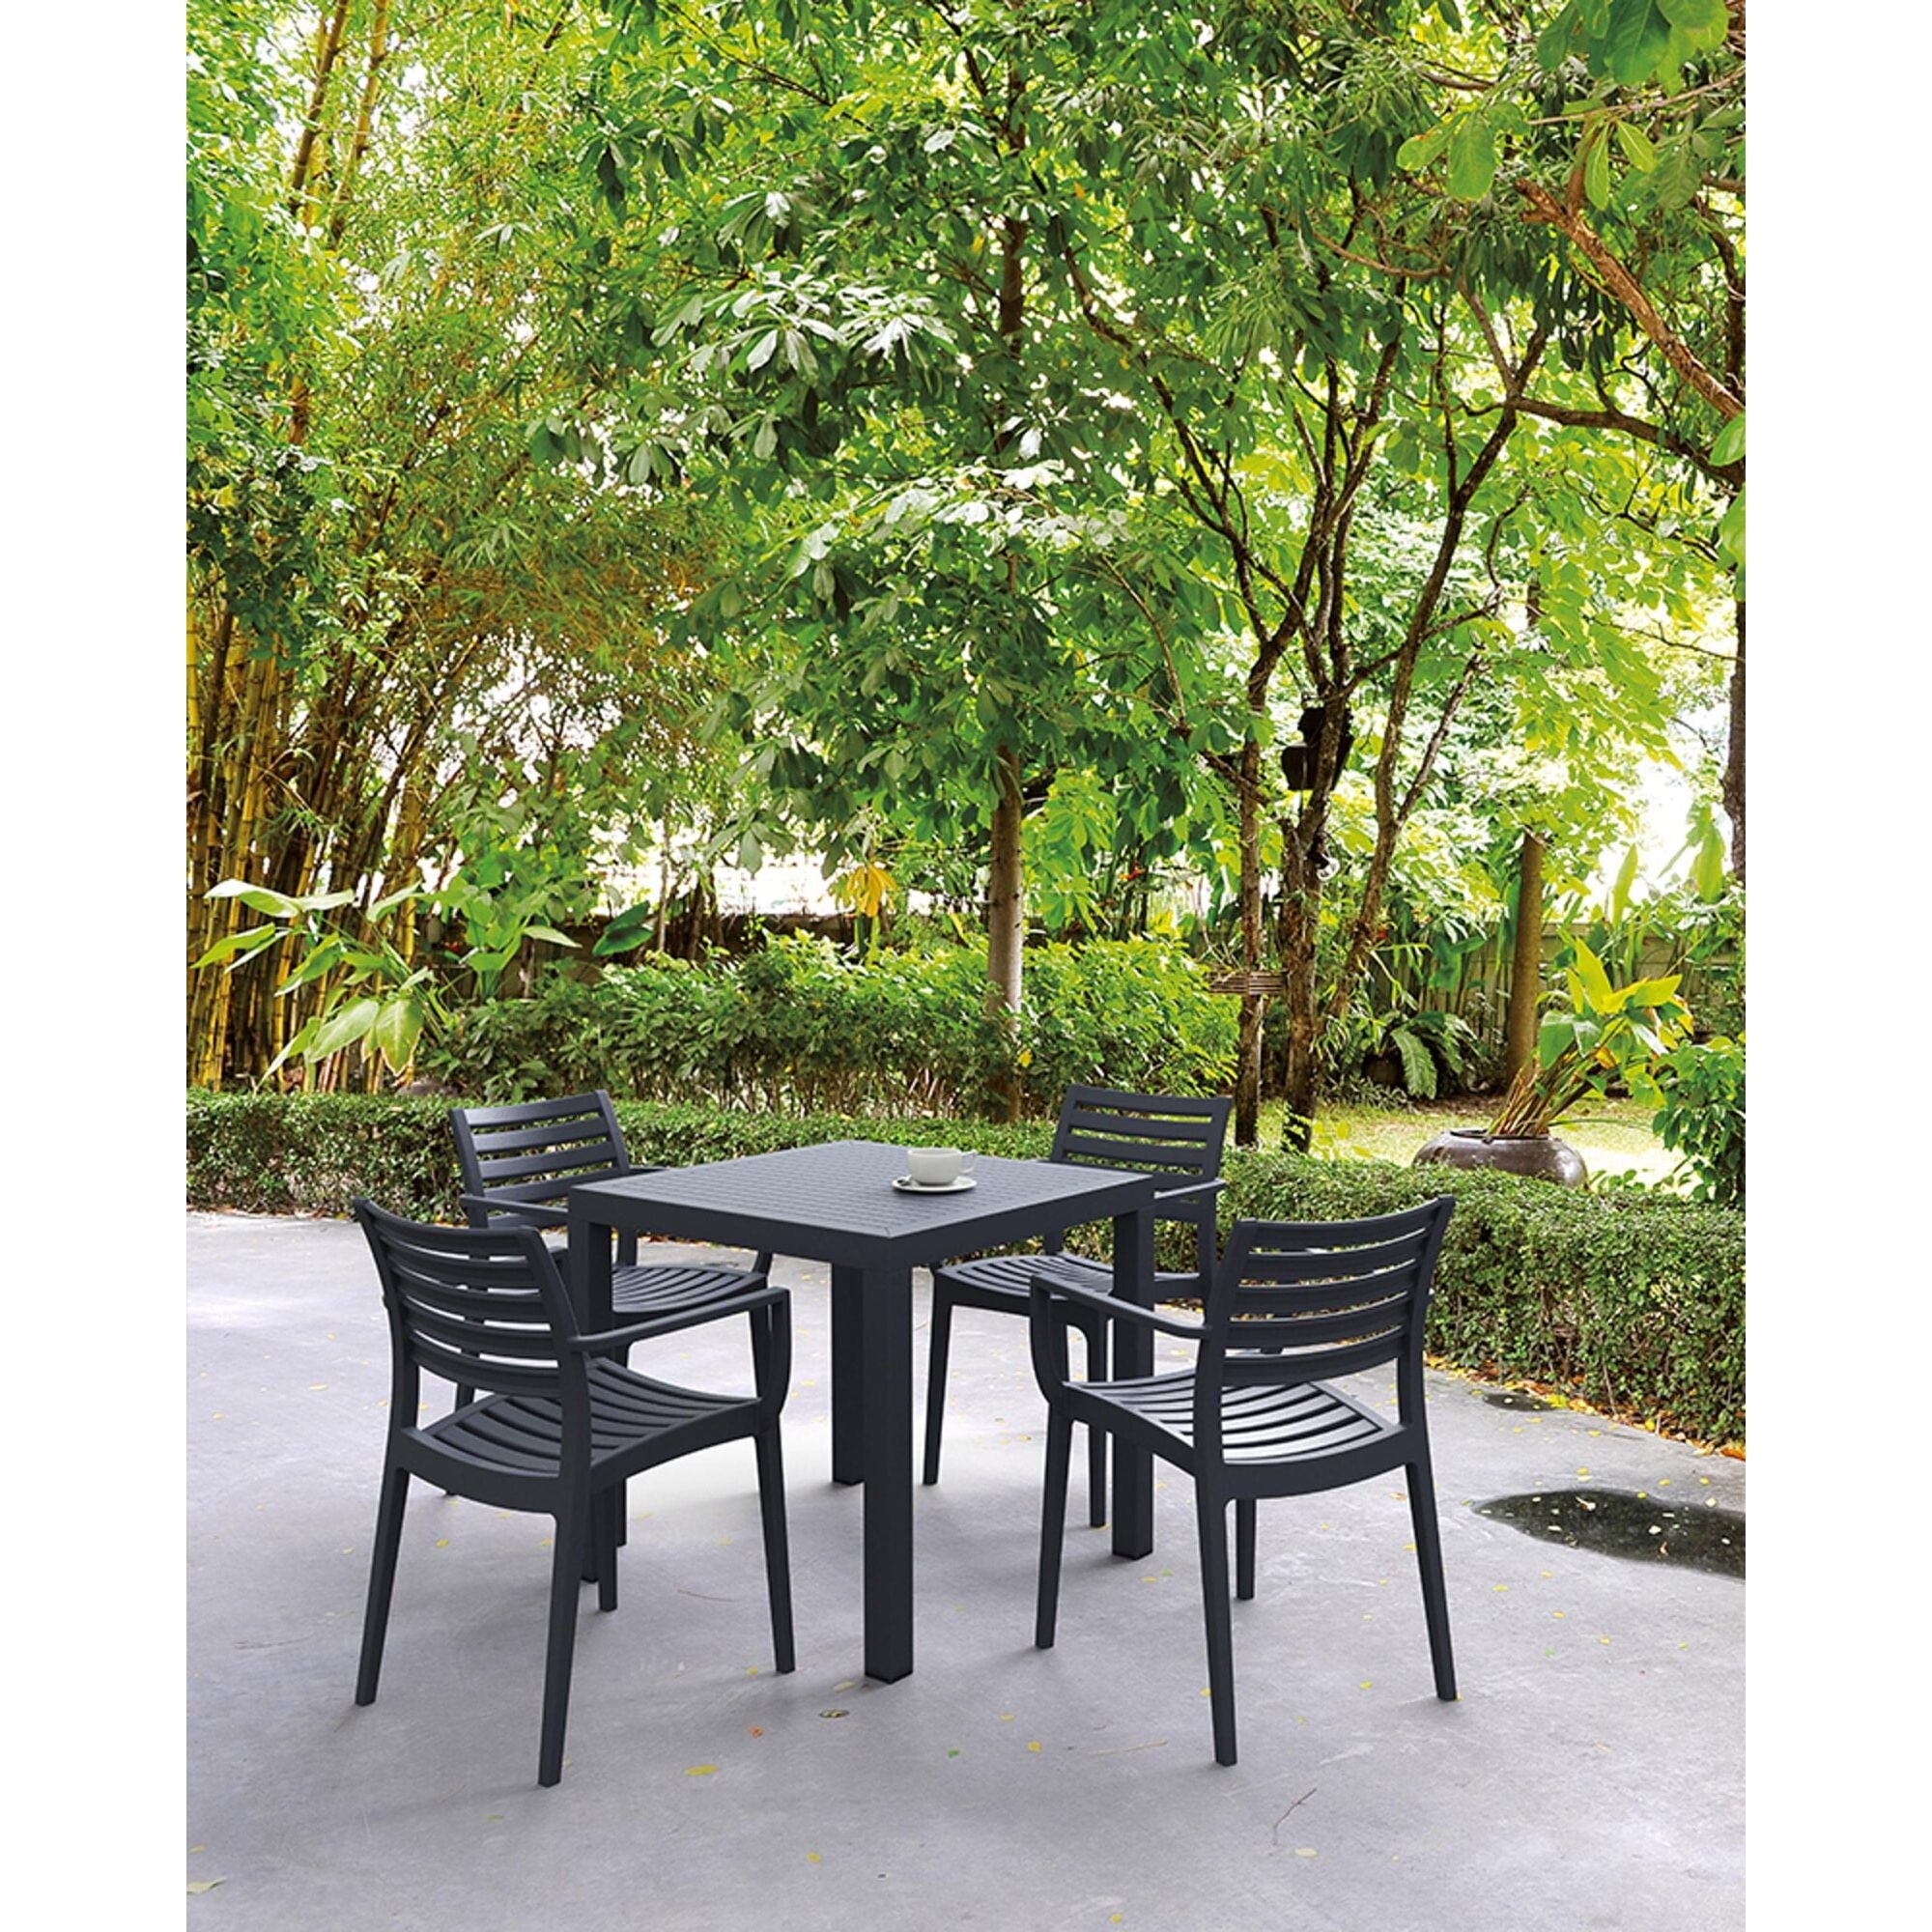 Garbar Arctic Square table indoors, outdoors 80x80 white